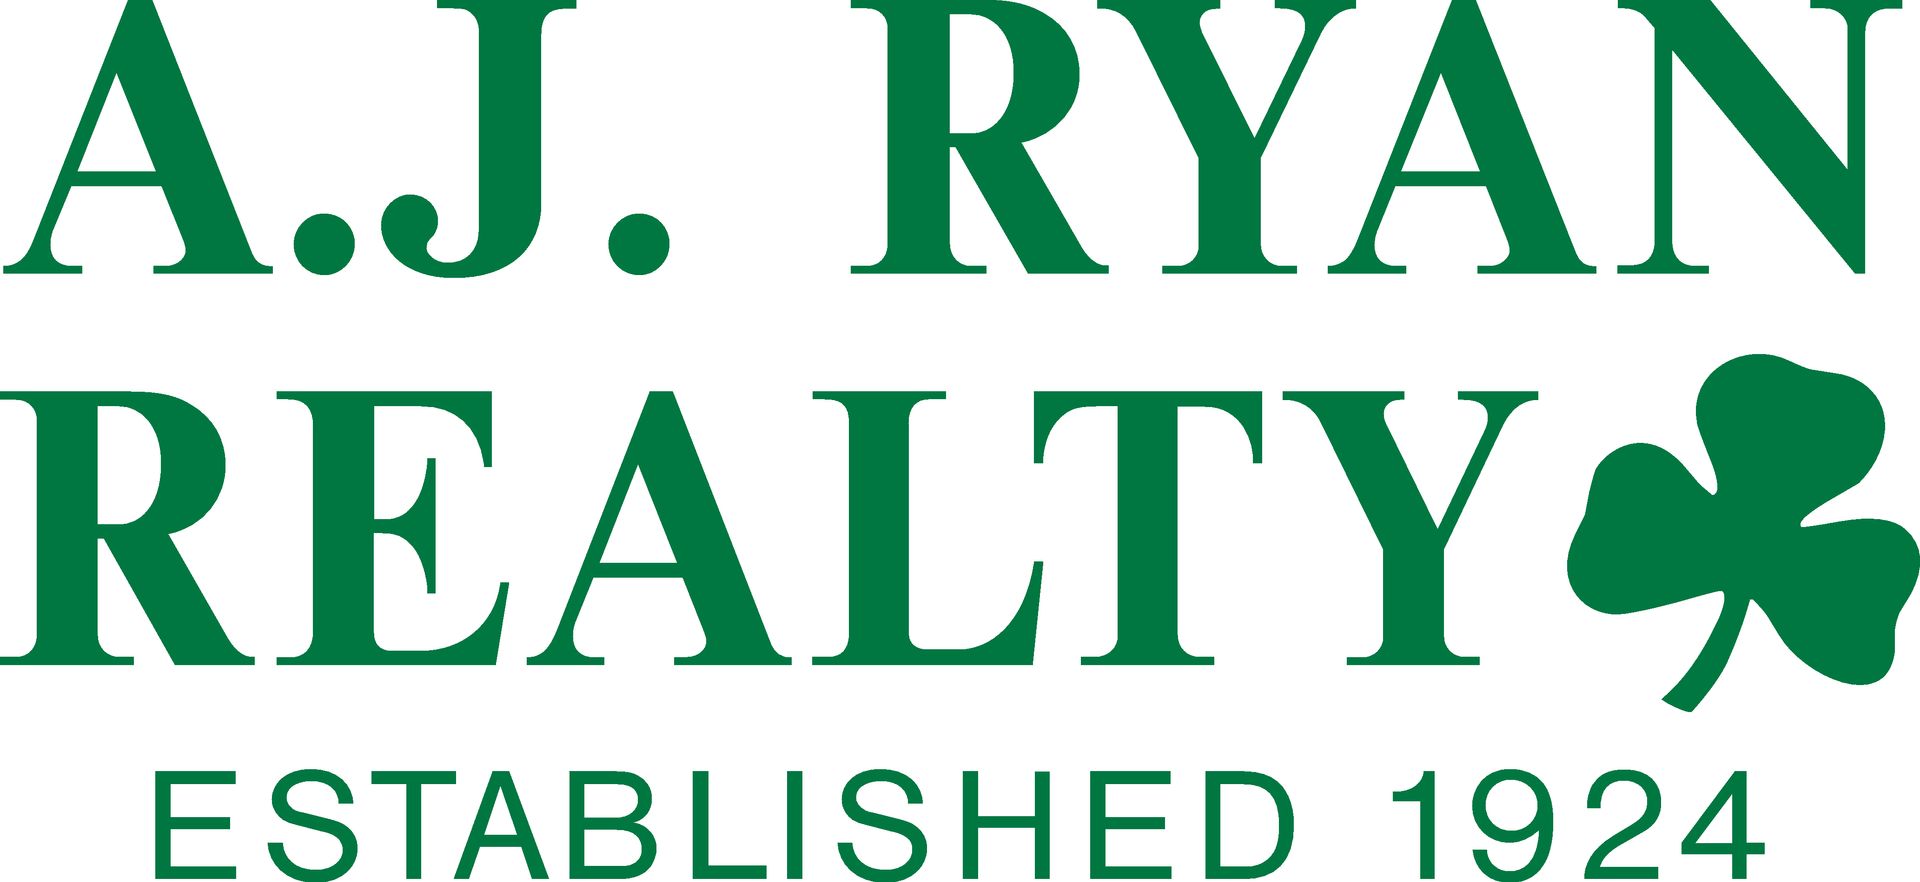 A.J. Ryan Realty - Buying and Selling Real Estate in Broward County for over 60 years